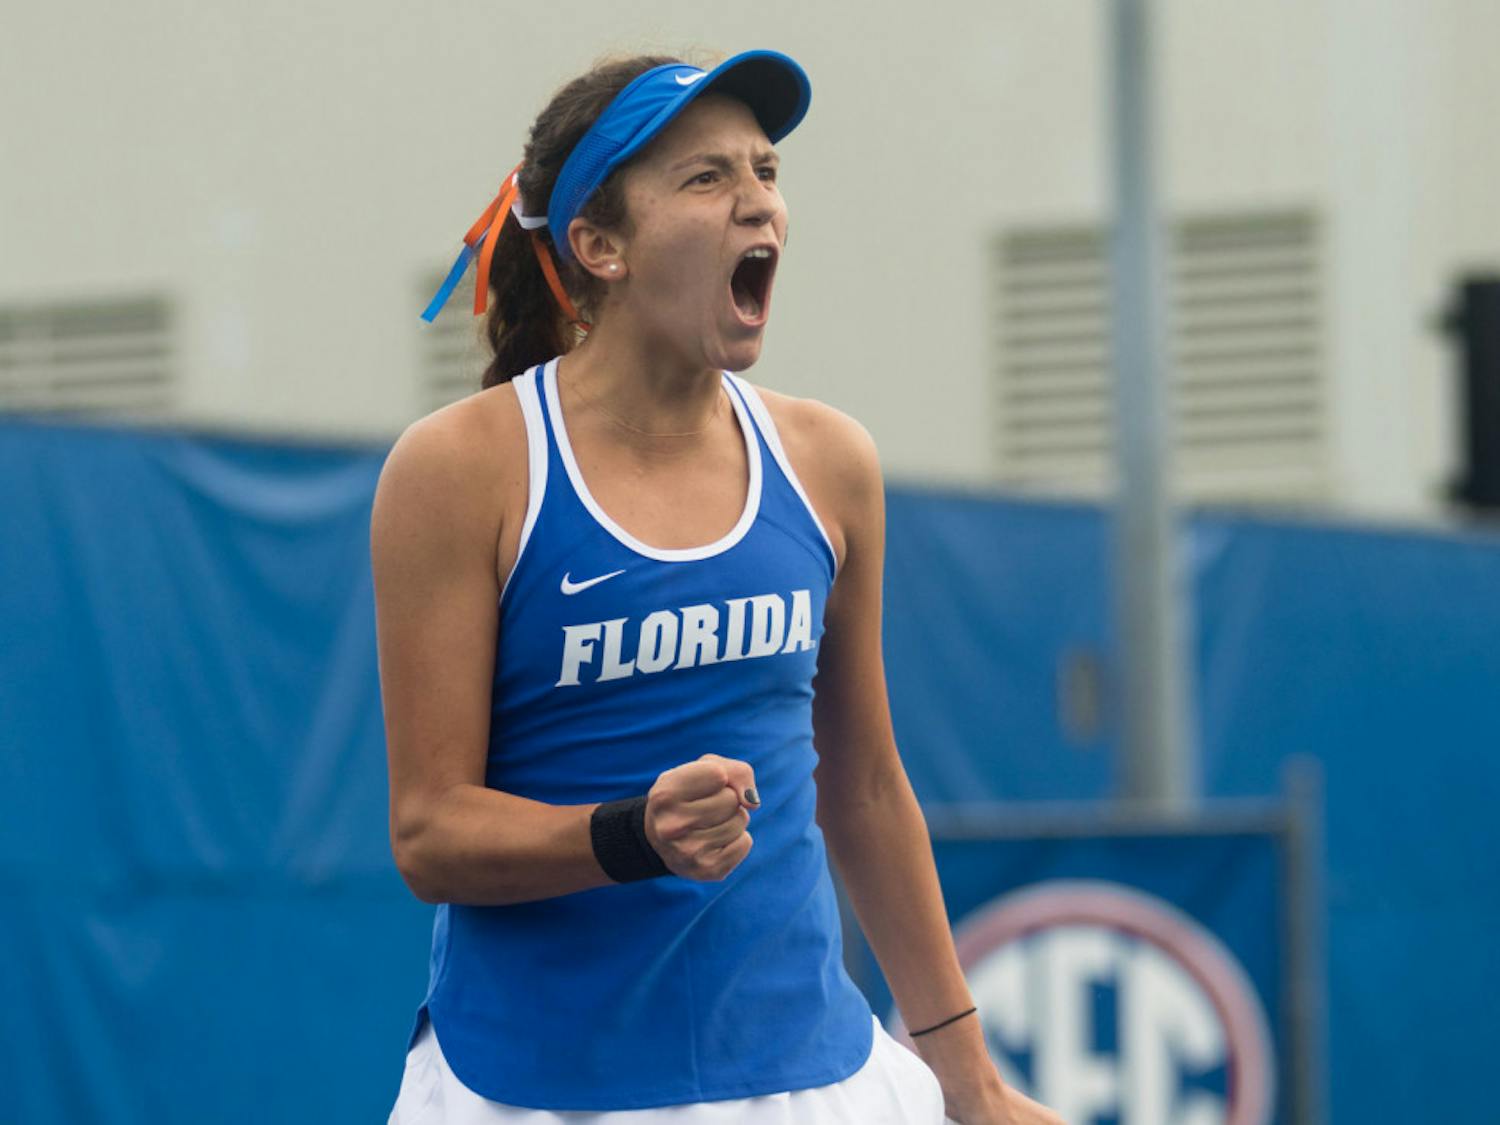 Senior Anna Danilina eked a first set victory, 7-5, but buried her opponent in the second set 6-0 take a first-round singles victory at the NCAA Individual Championships Wednesday.&nbsp;